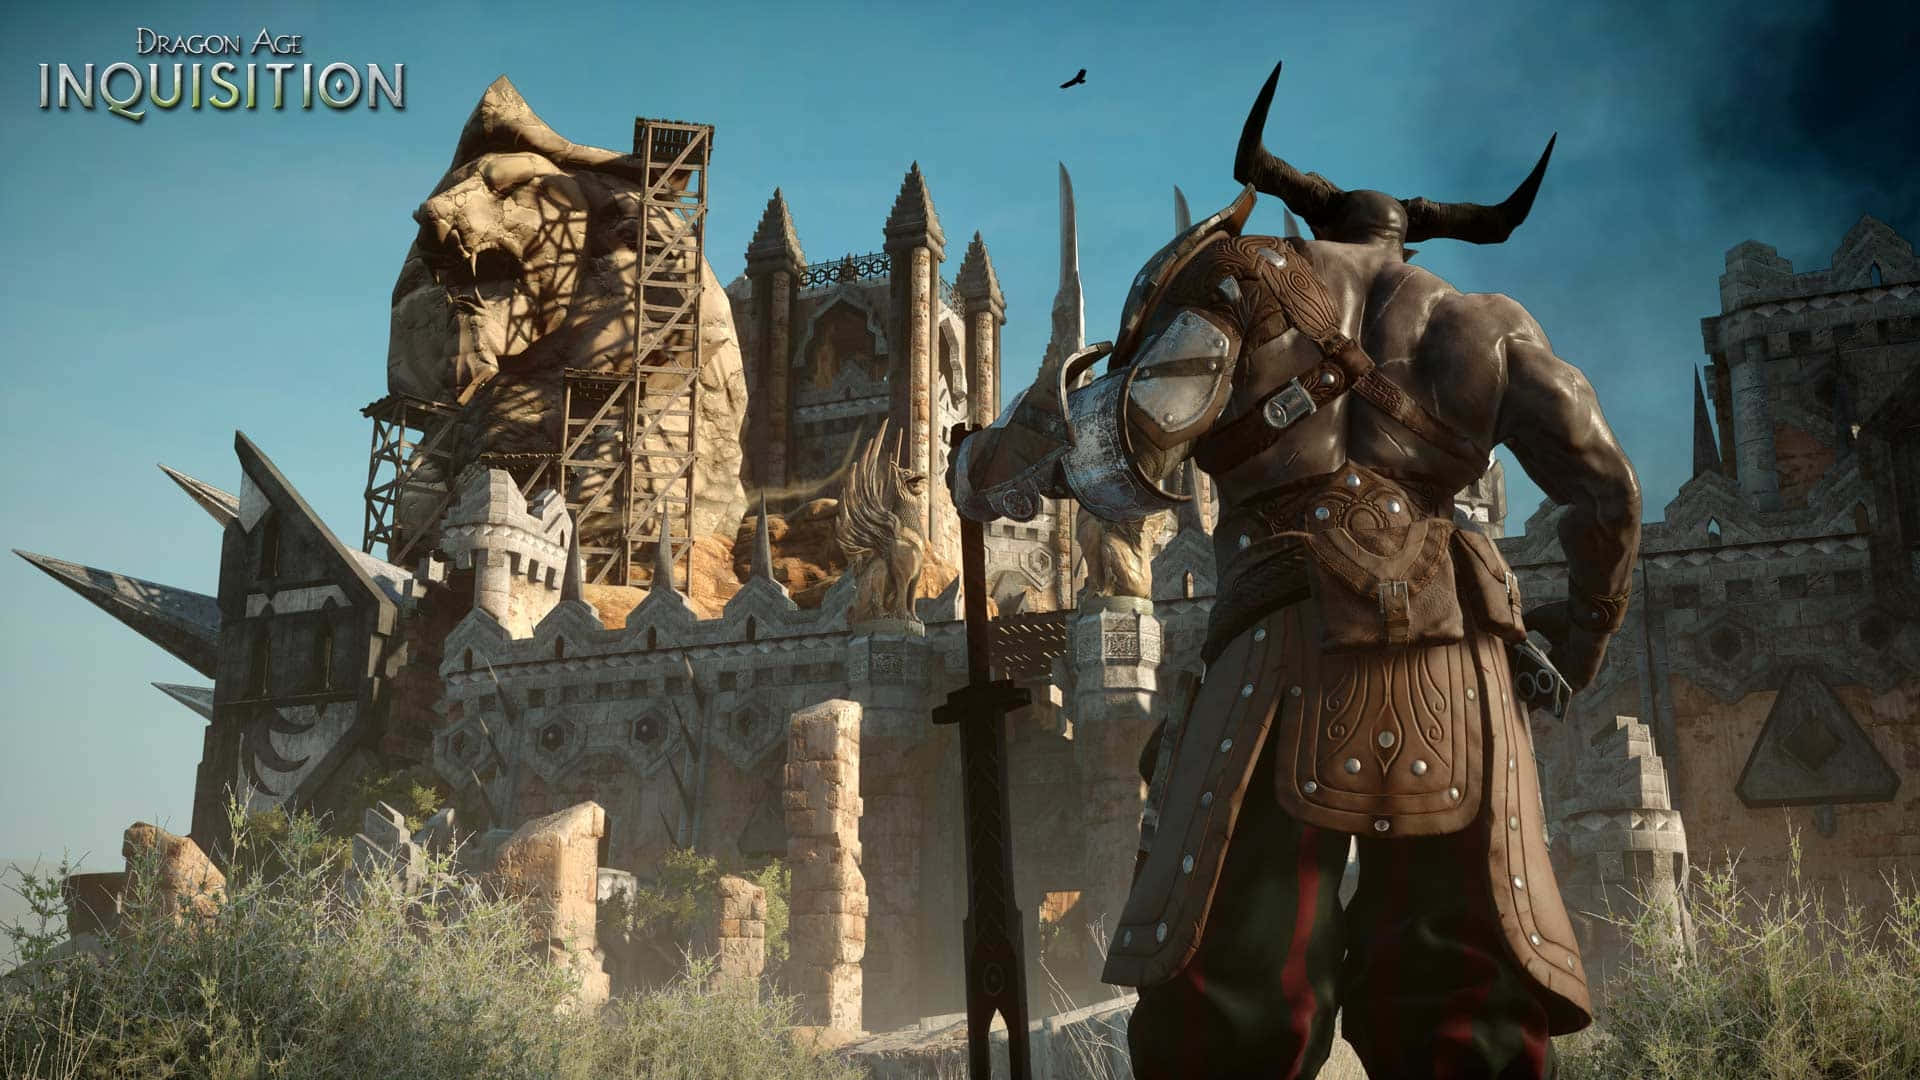 Explore a vibrant world of epic battles, legendary characters, and magical creatures in Dragon Age: Inquisition